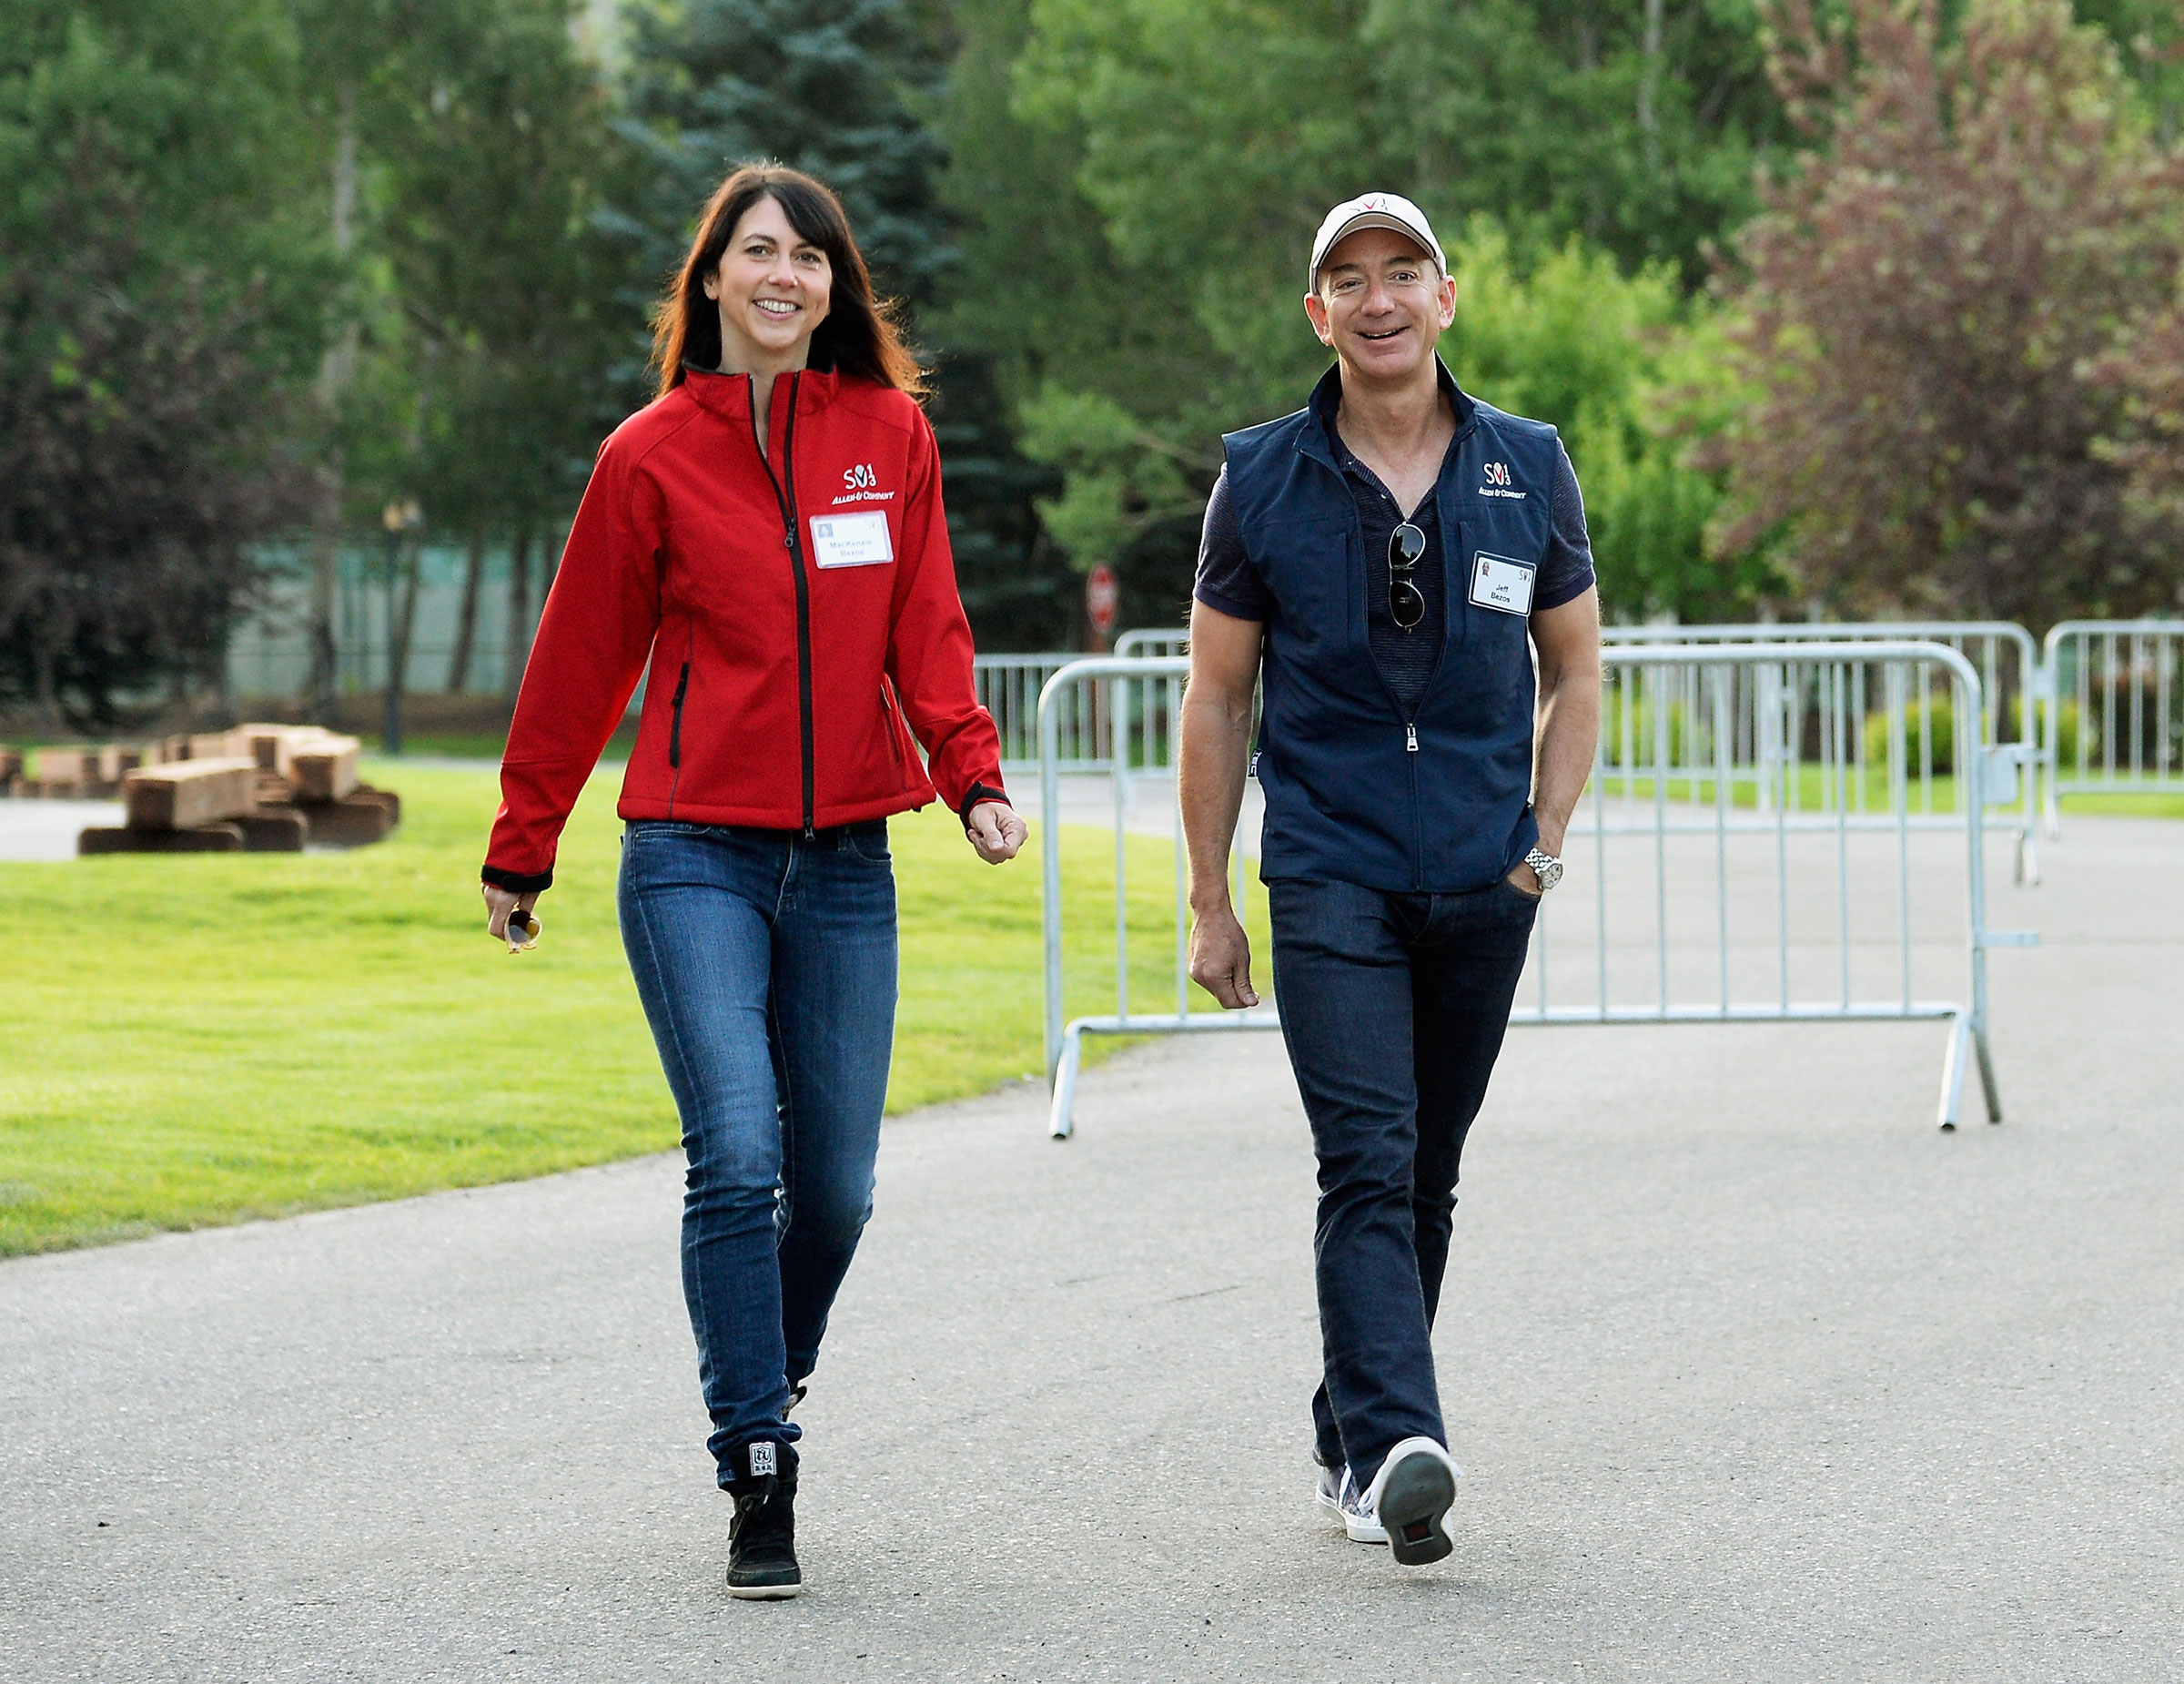 Mackenzie Scott and Jeff Bezos in Sun Valley, Idaho for the Allen &amp; Co. annual conference on July 10, 2013.